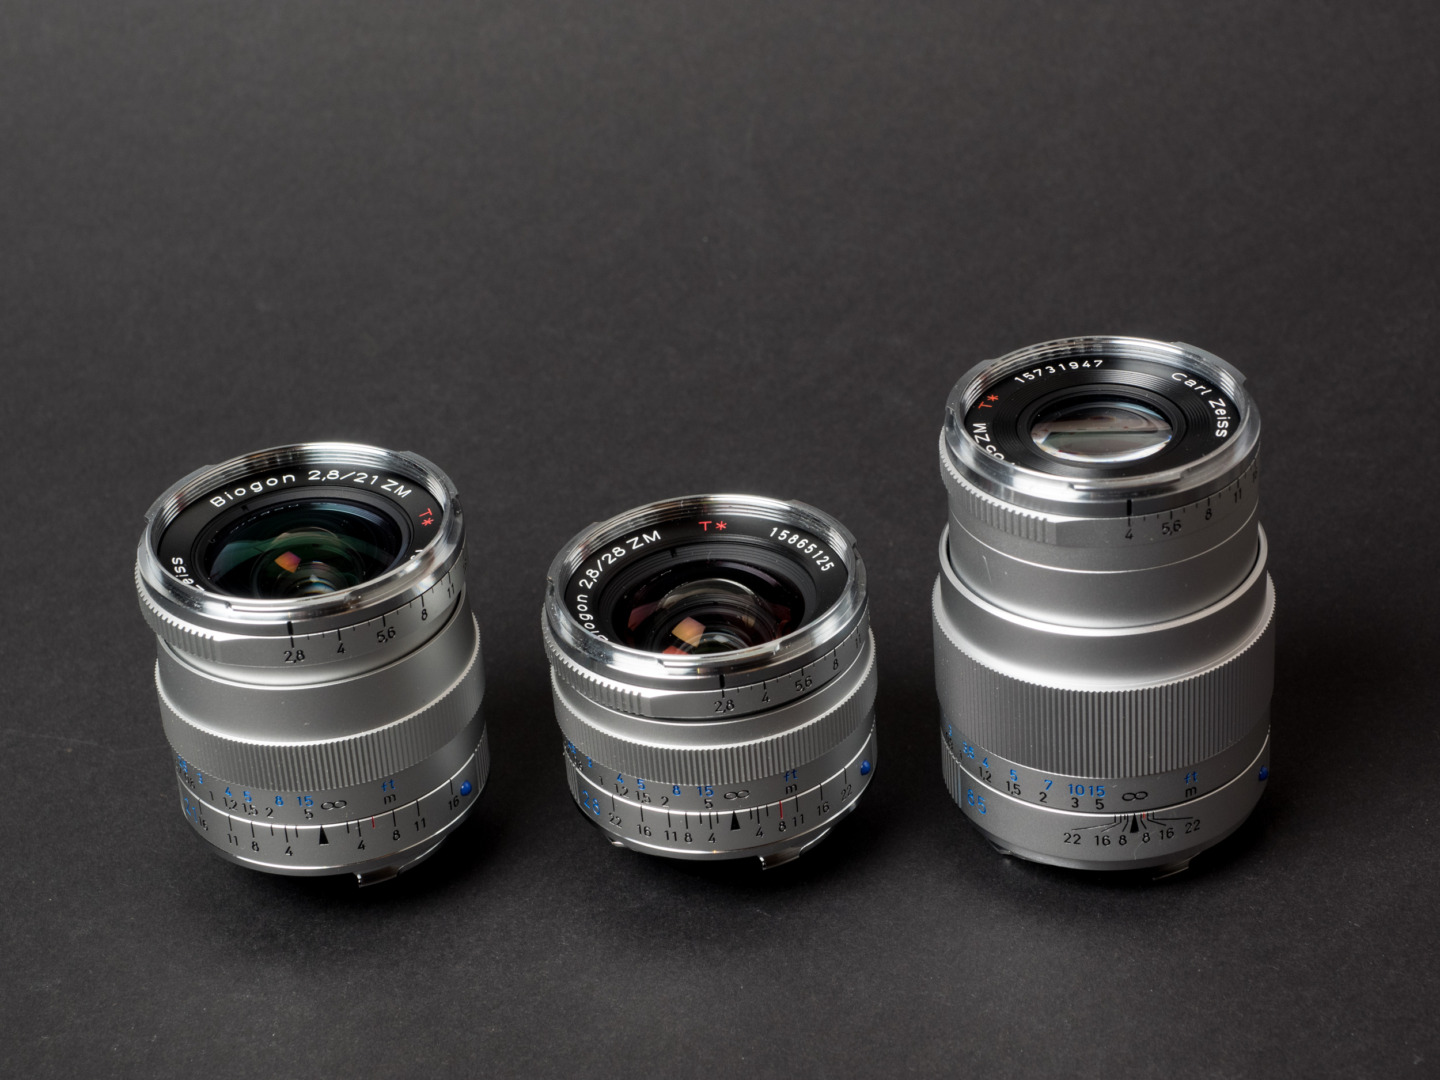 A cute trio: Zeiss Biogon ZM 21/2.8, Biogon 28/2.8, Tele-Tessar 85/4. Together, they cost less than almost any Leica M mount lens